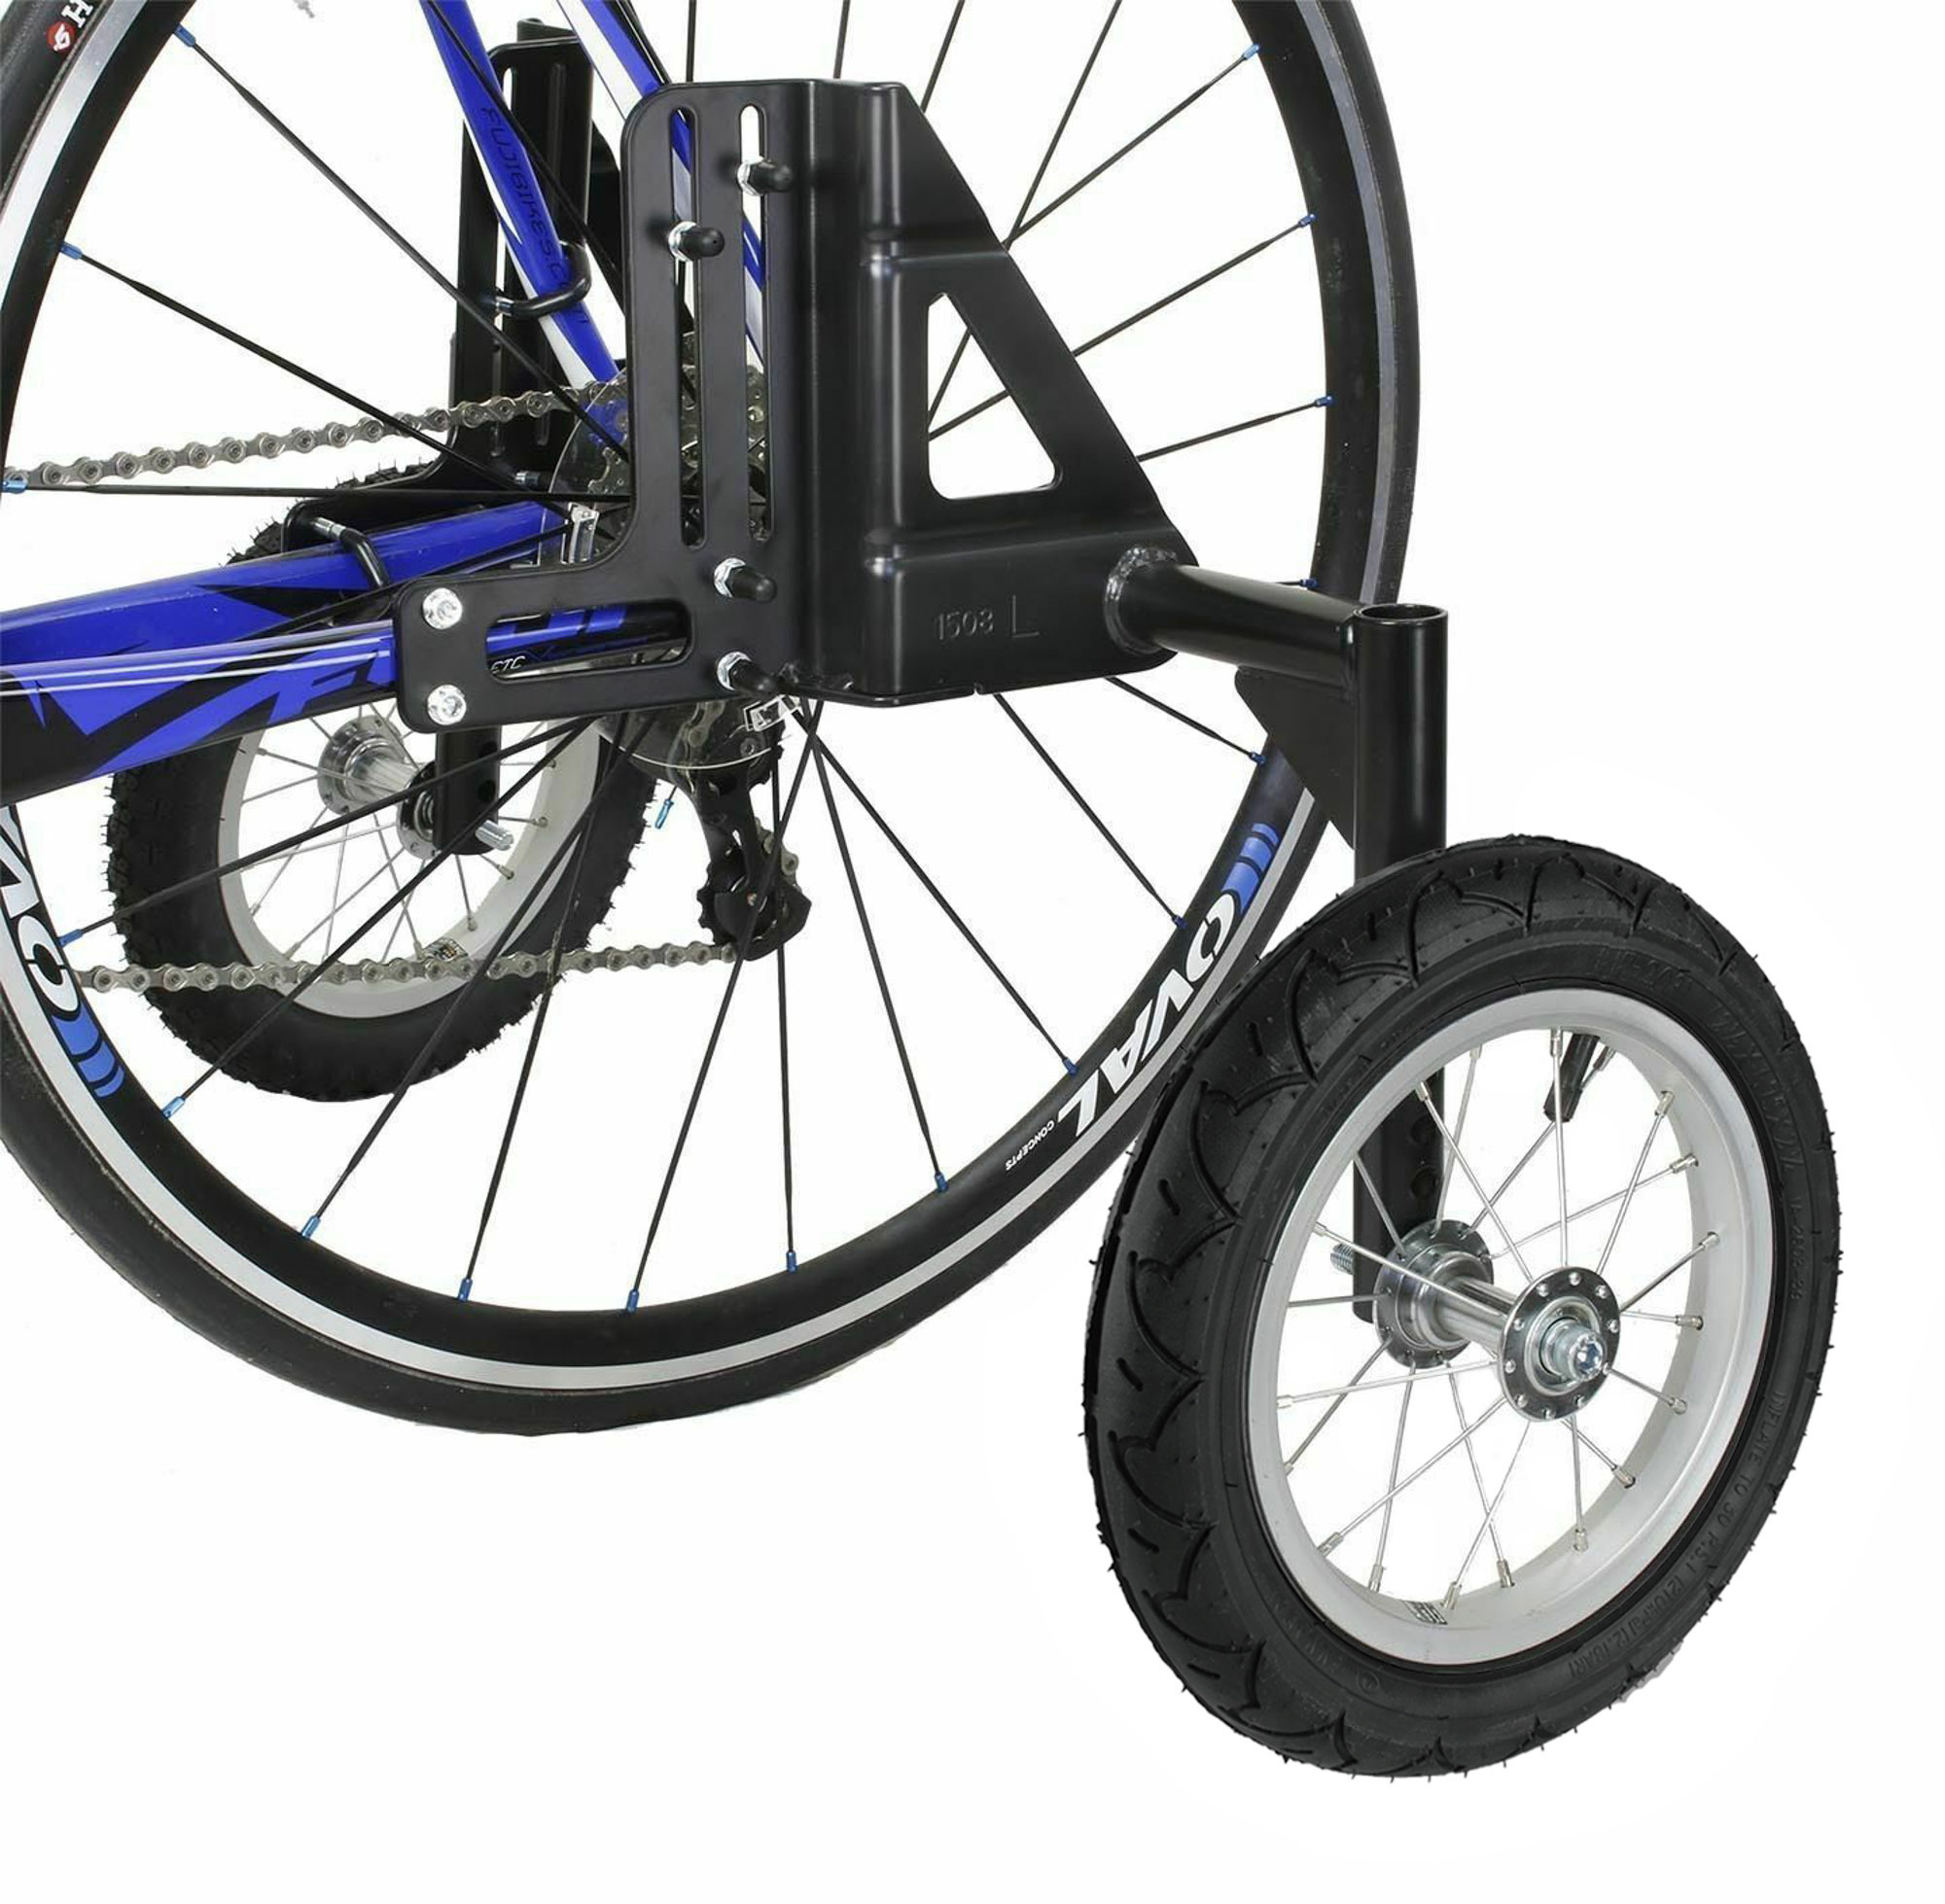 Cyclingdeal Adjustable Adult Bicycle Bike Training Wheels Fits